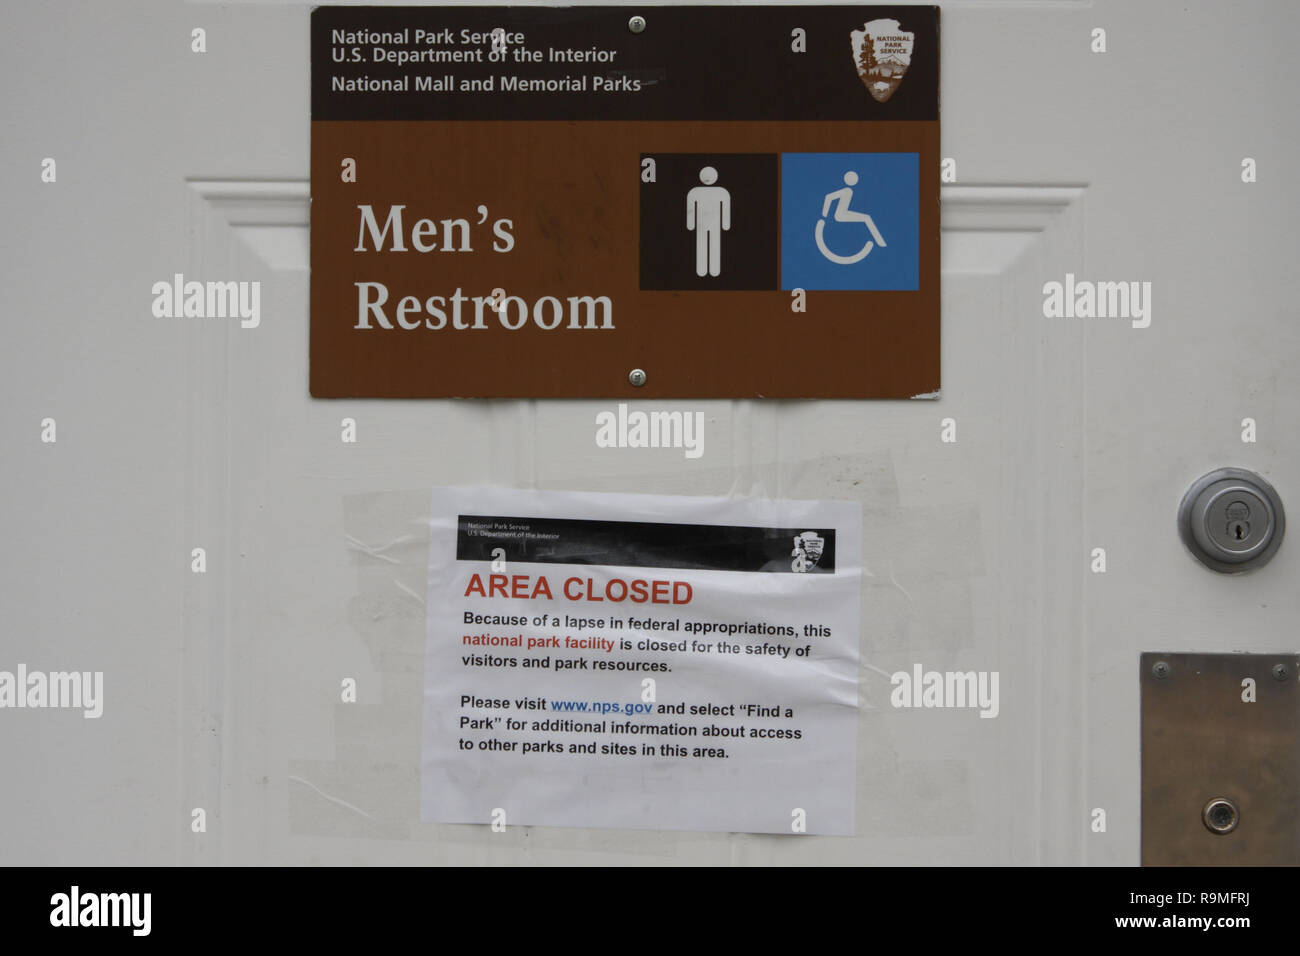 Washington, DC, USA. 25th Dec, 2018. On Day 4 of the Partial Federal Government Shutdown, while there were not barriers around NPS sites as there were during the October 2013 shutdown, some facilities were closed due to the lapse in funding. Here the Men's Restroom at the Washington Monument Lodge is seen with a sign on the door indicating that it is closed. Credit: Evan Golub/ZUMA Wire/Alamy Live News Stock Photo